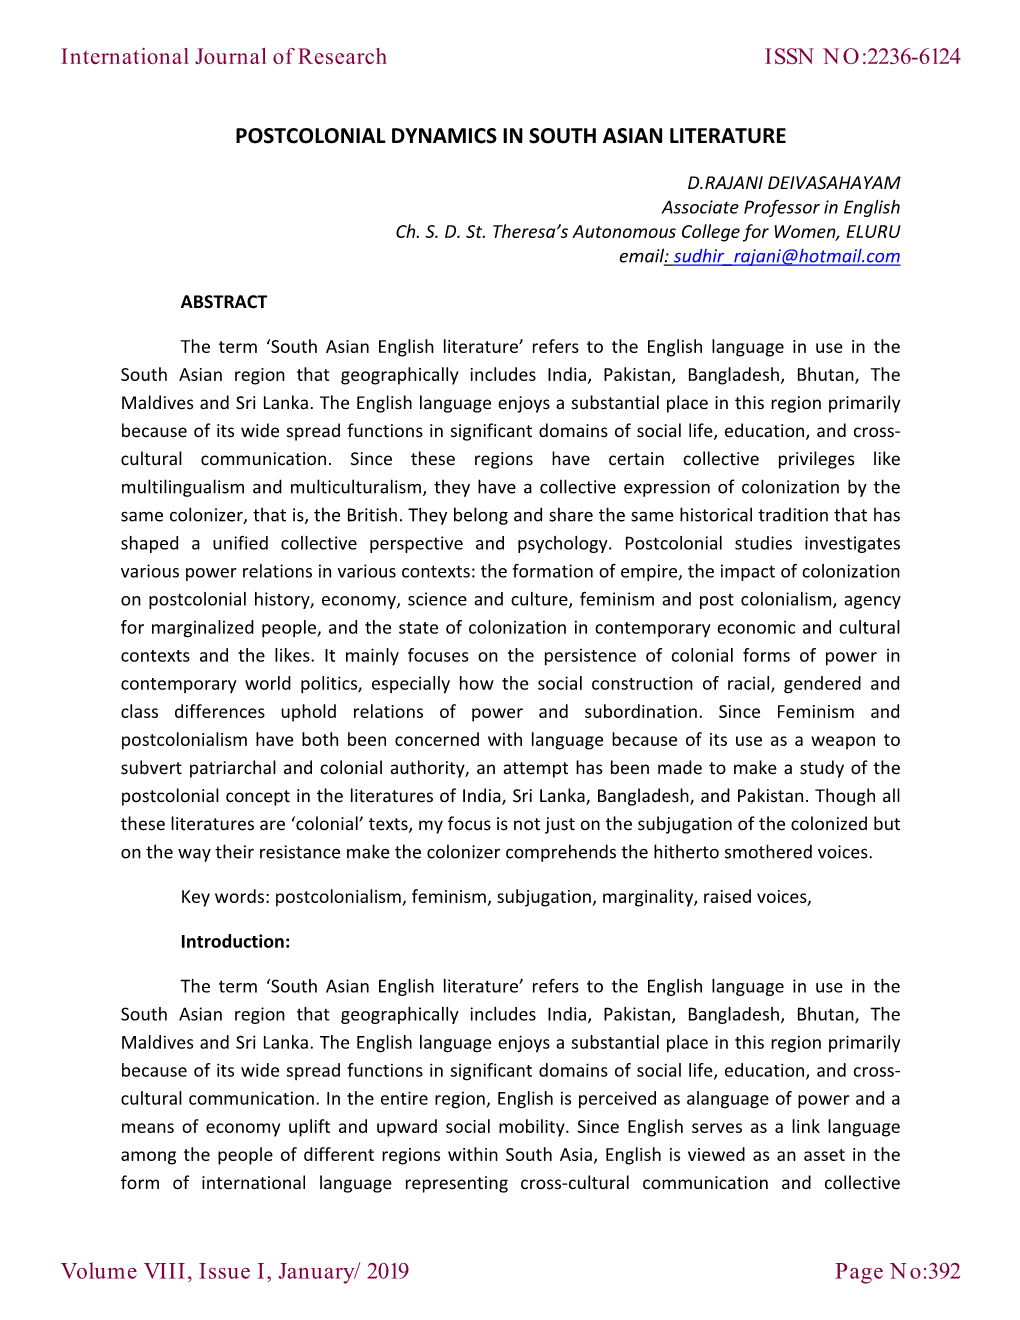 POSTCOLONIAL DYNAMICS in SOUTH ASIAN LITERATURE International Journal of Research Volume VIII, Issue I, January/2019 ISSN NO:223